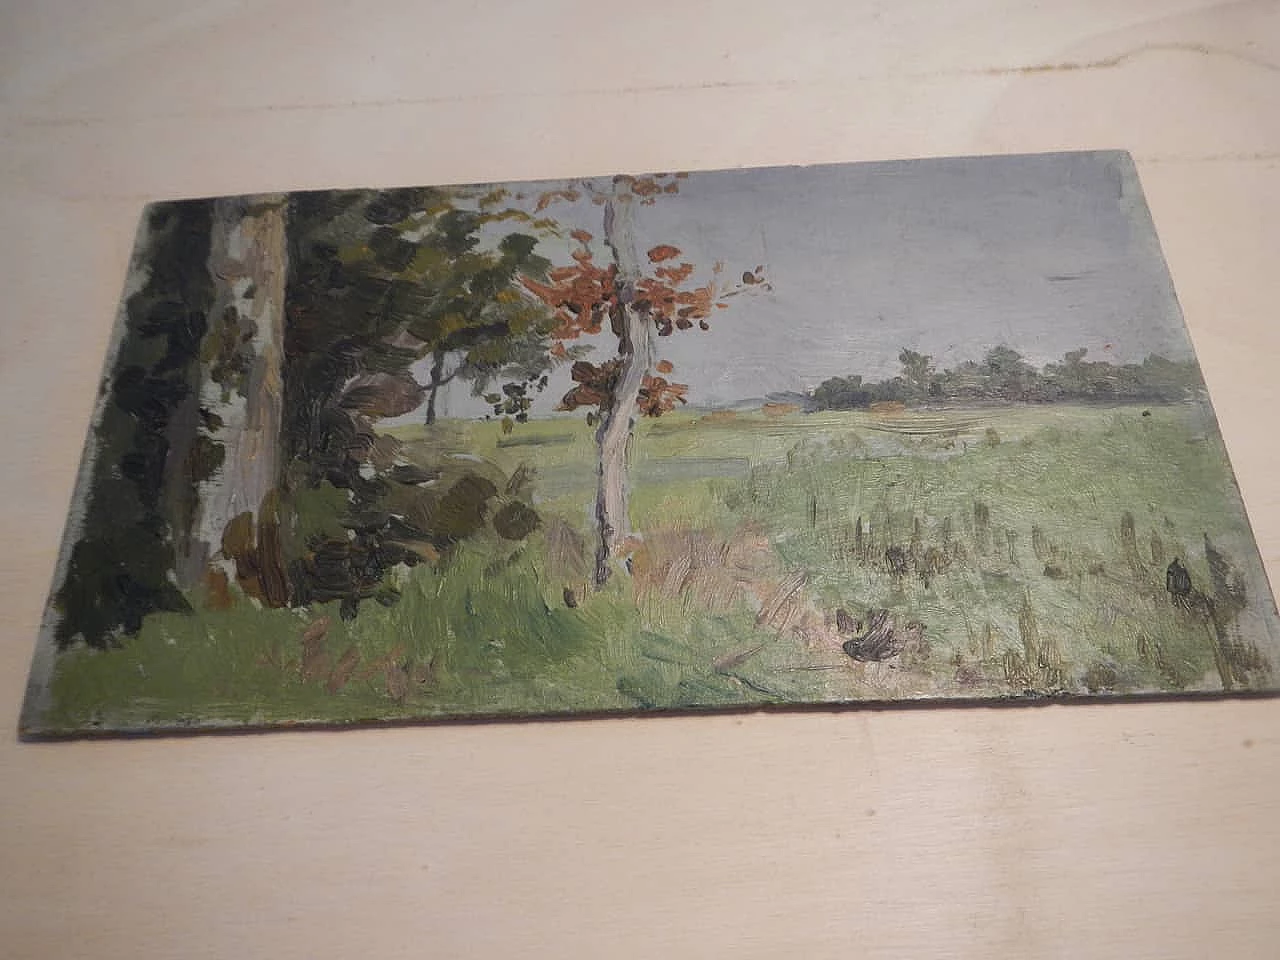 Des Champs, countryside landscape, painting on wood, early 20th century 11